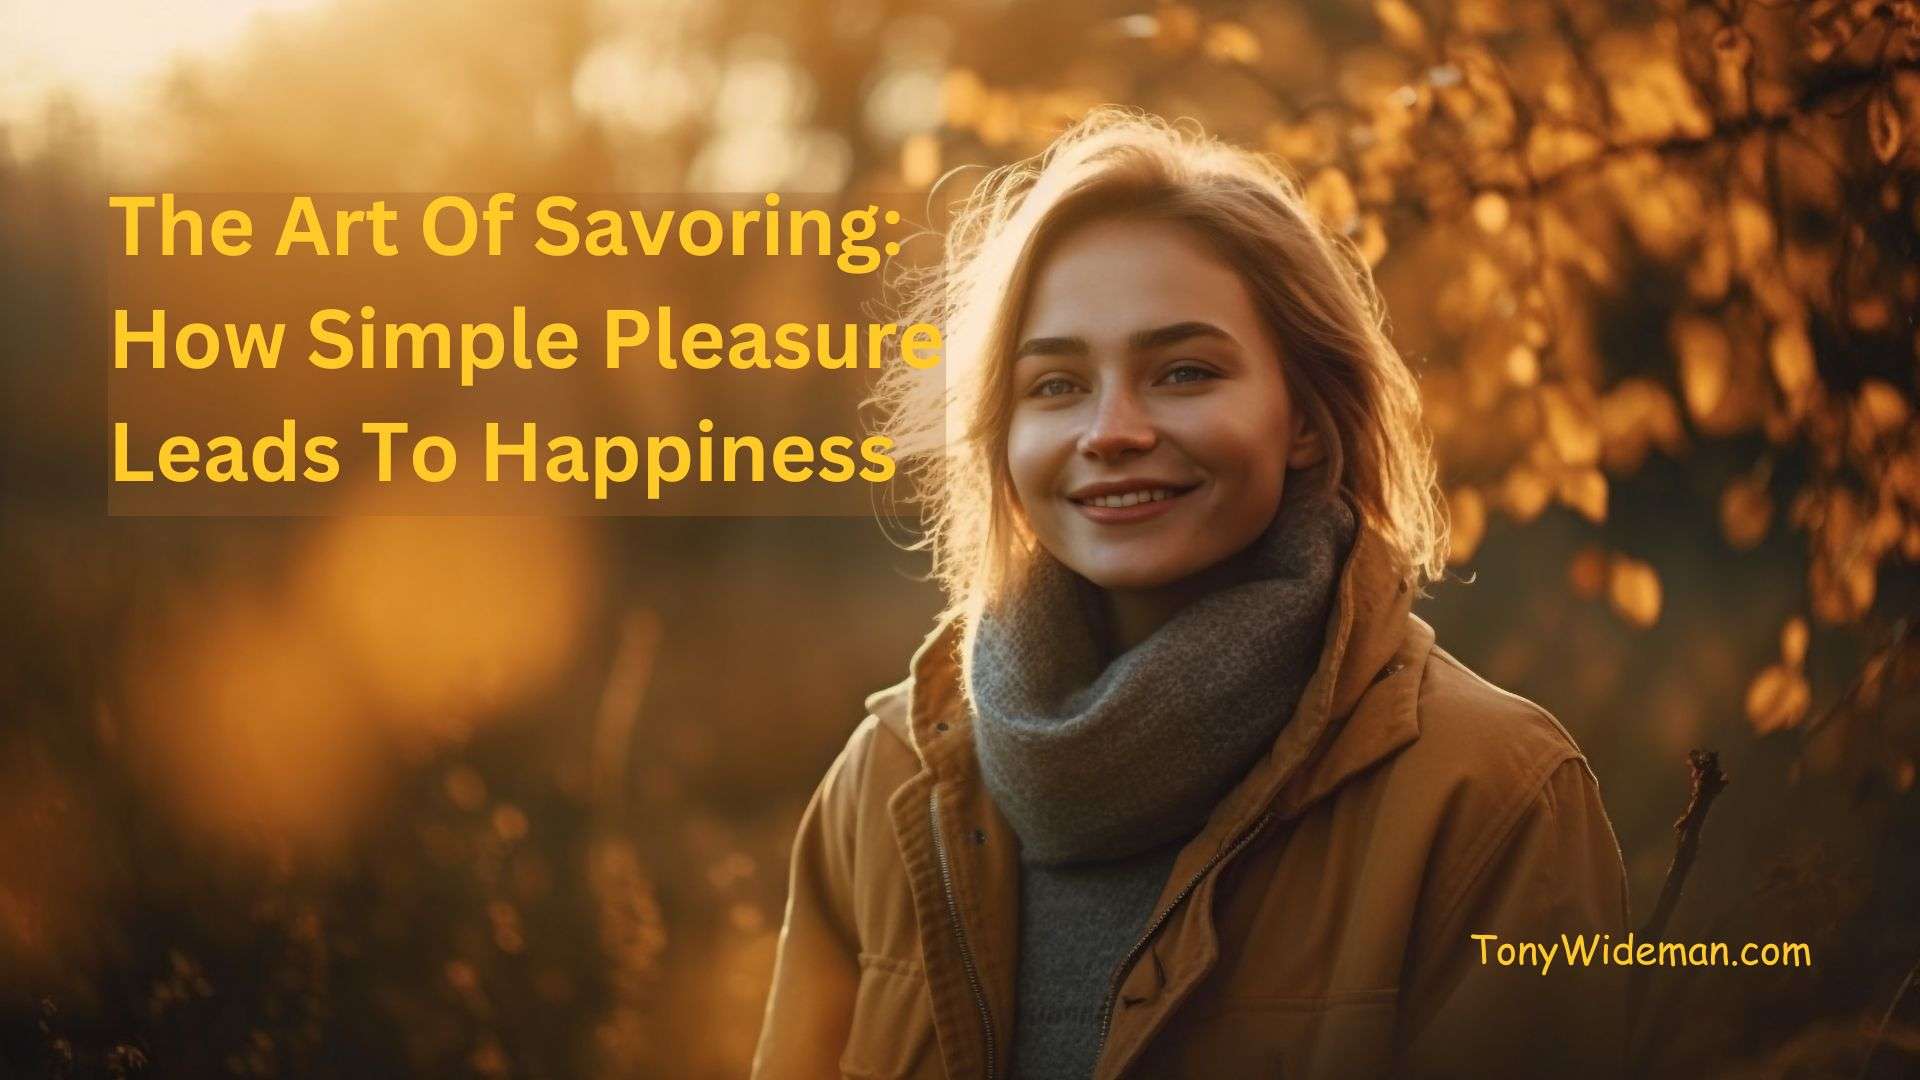 The Art Of Savoring: How Simple Pleasure Leads To Happiness